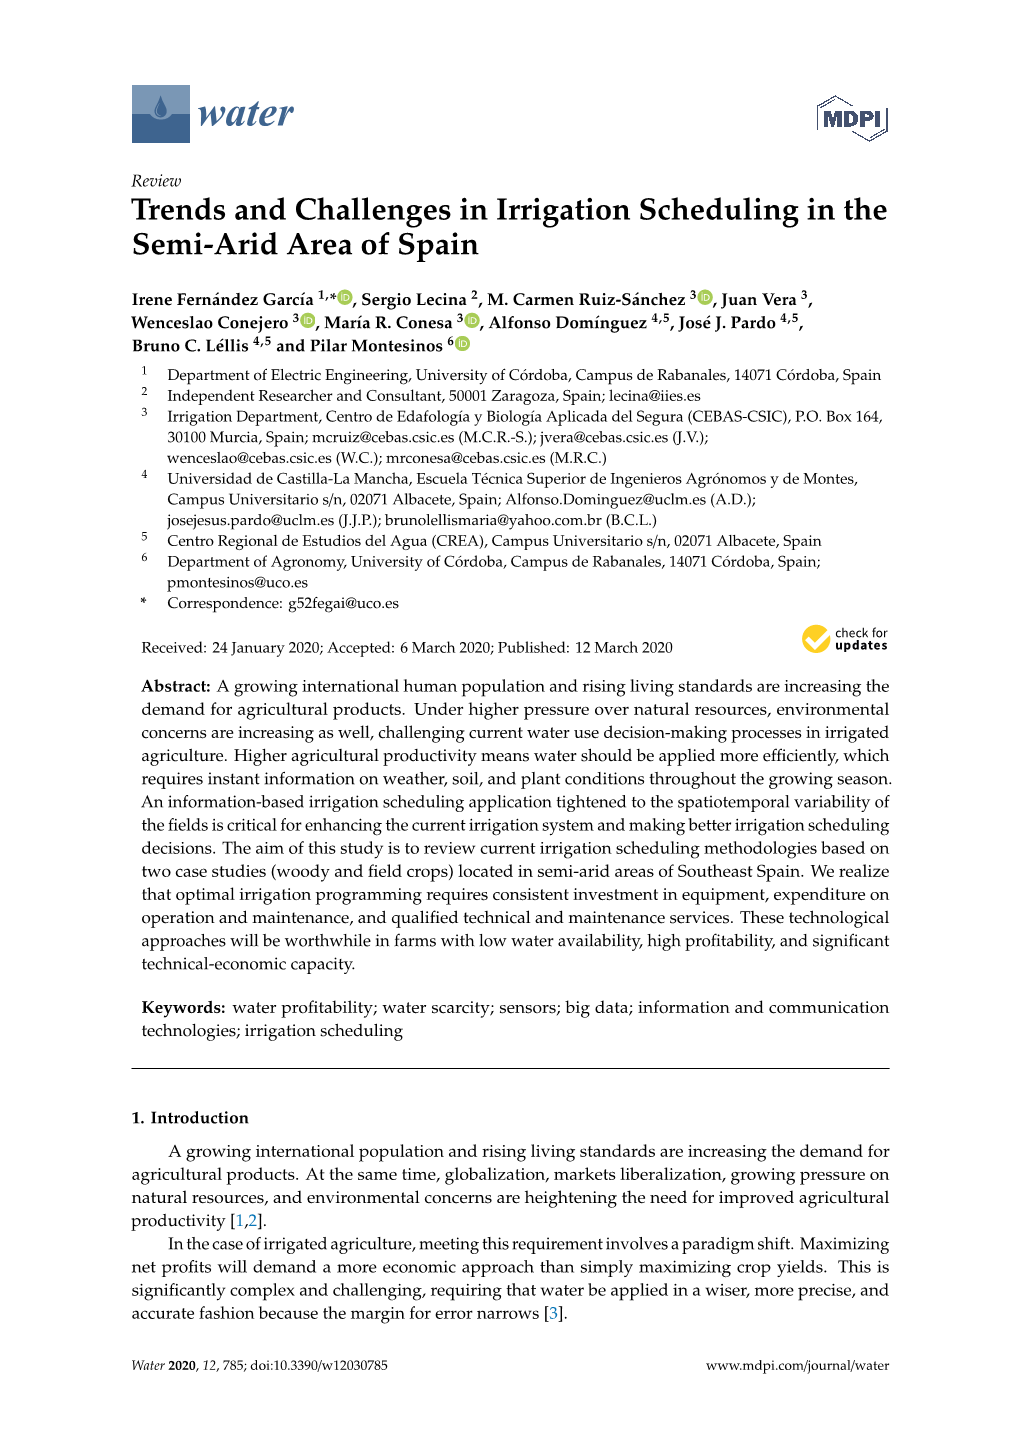 Trends and Challenges in Irrigation Scheduling in the Semi-Arid Area of Spain